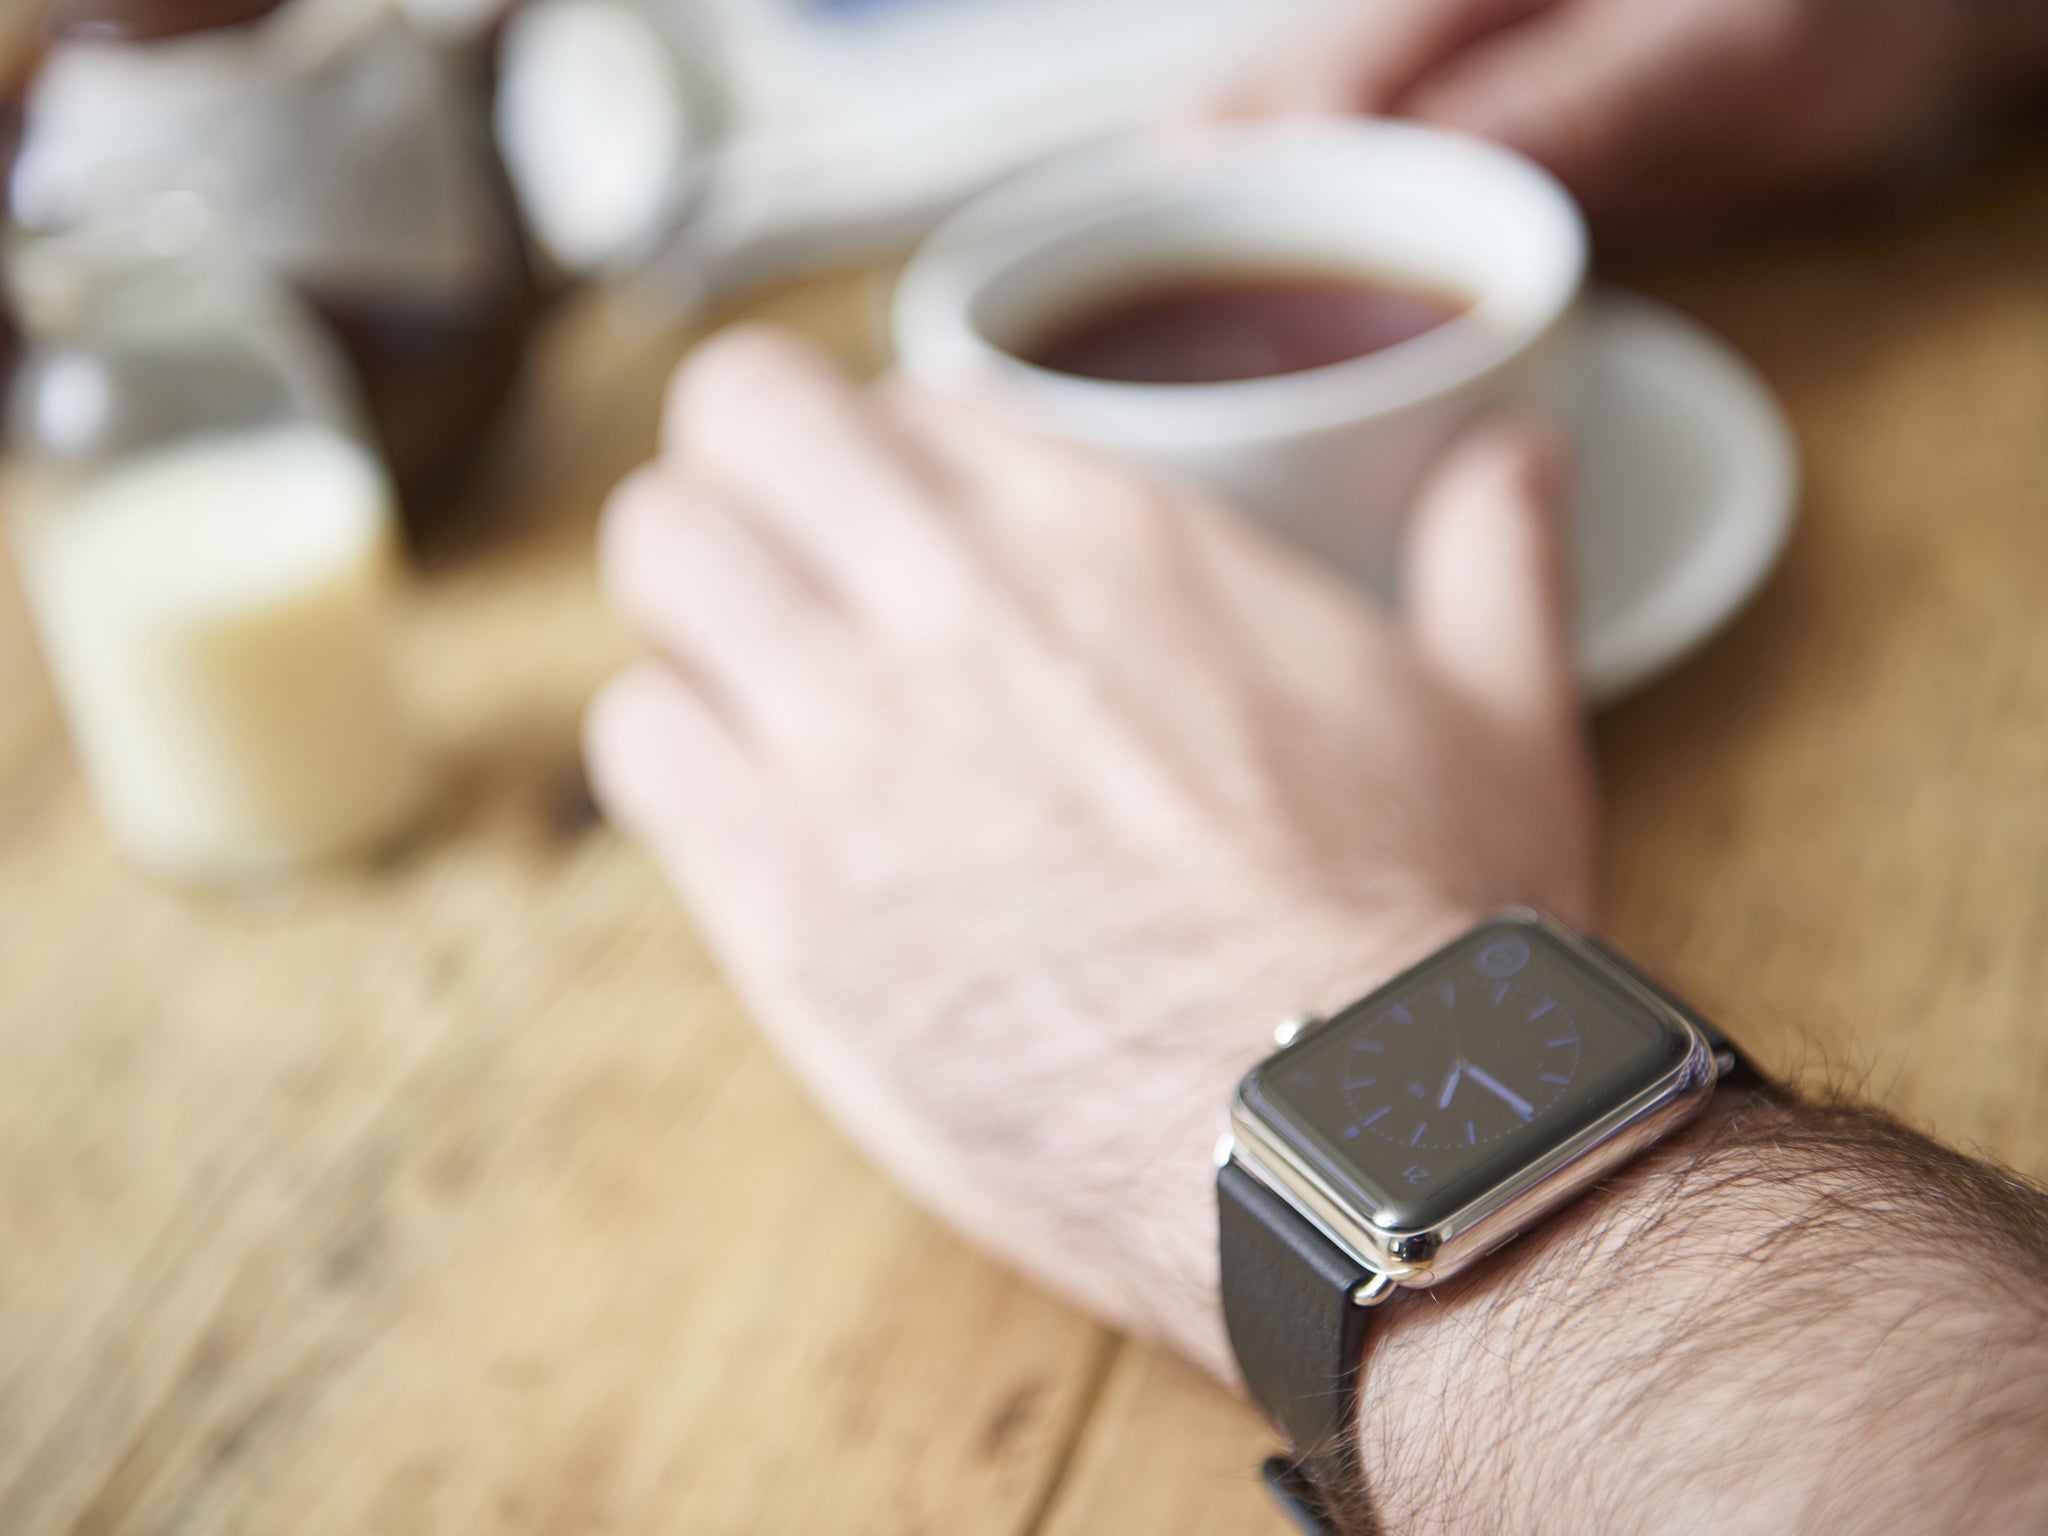 The Apple watch comes with plenty of hidden features which are hugely valuable